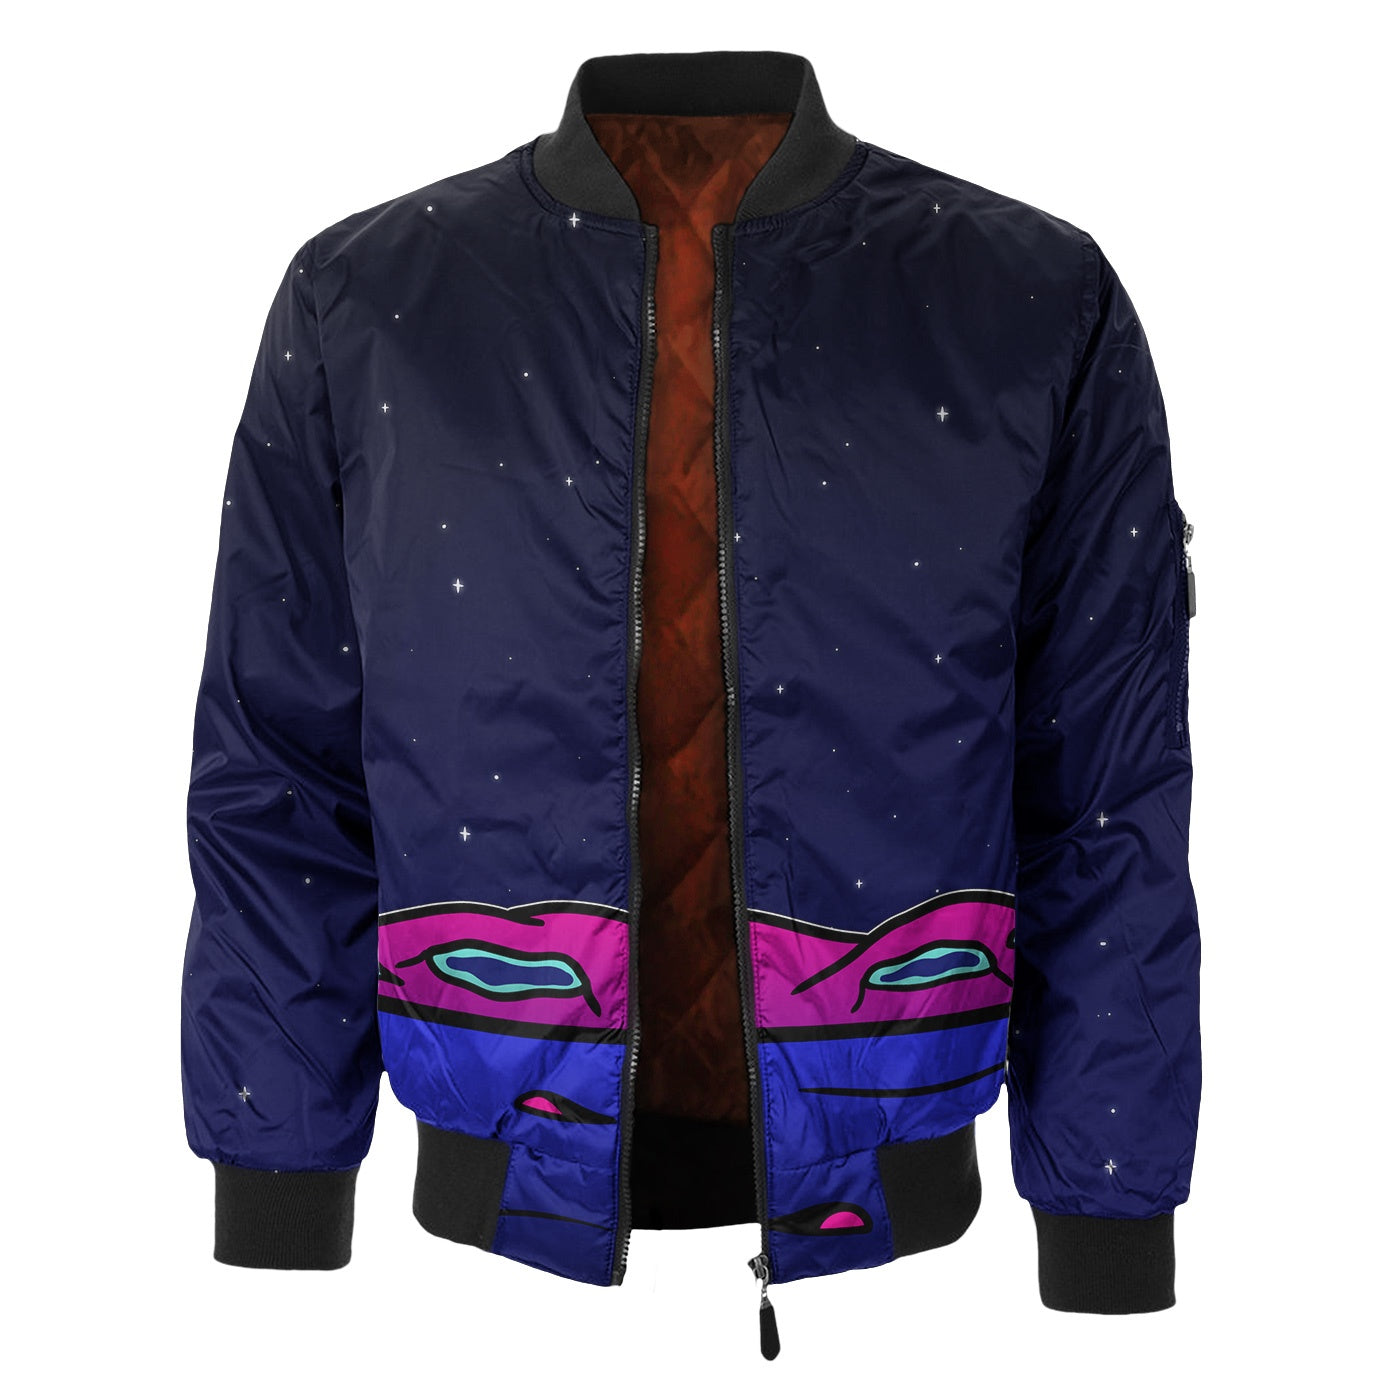 We Are Here Bomber Jacket